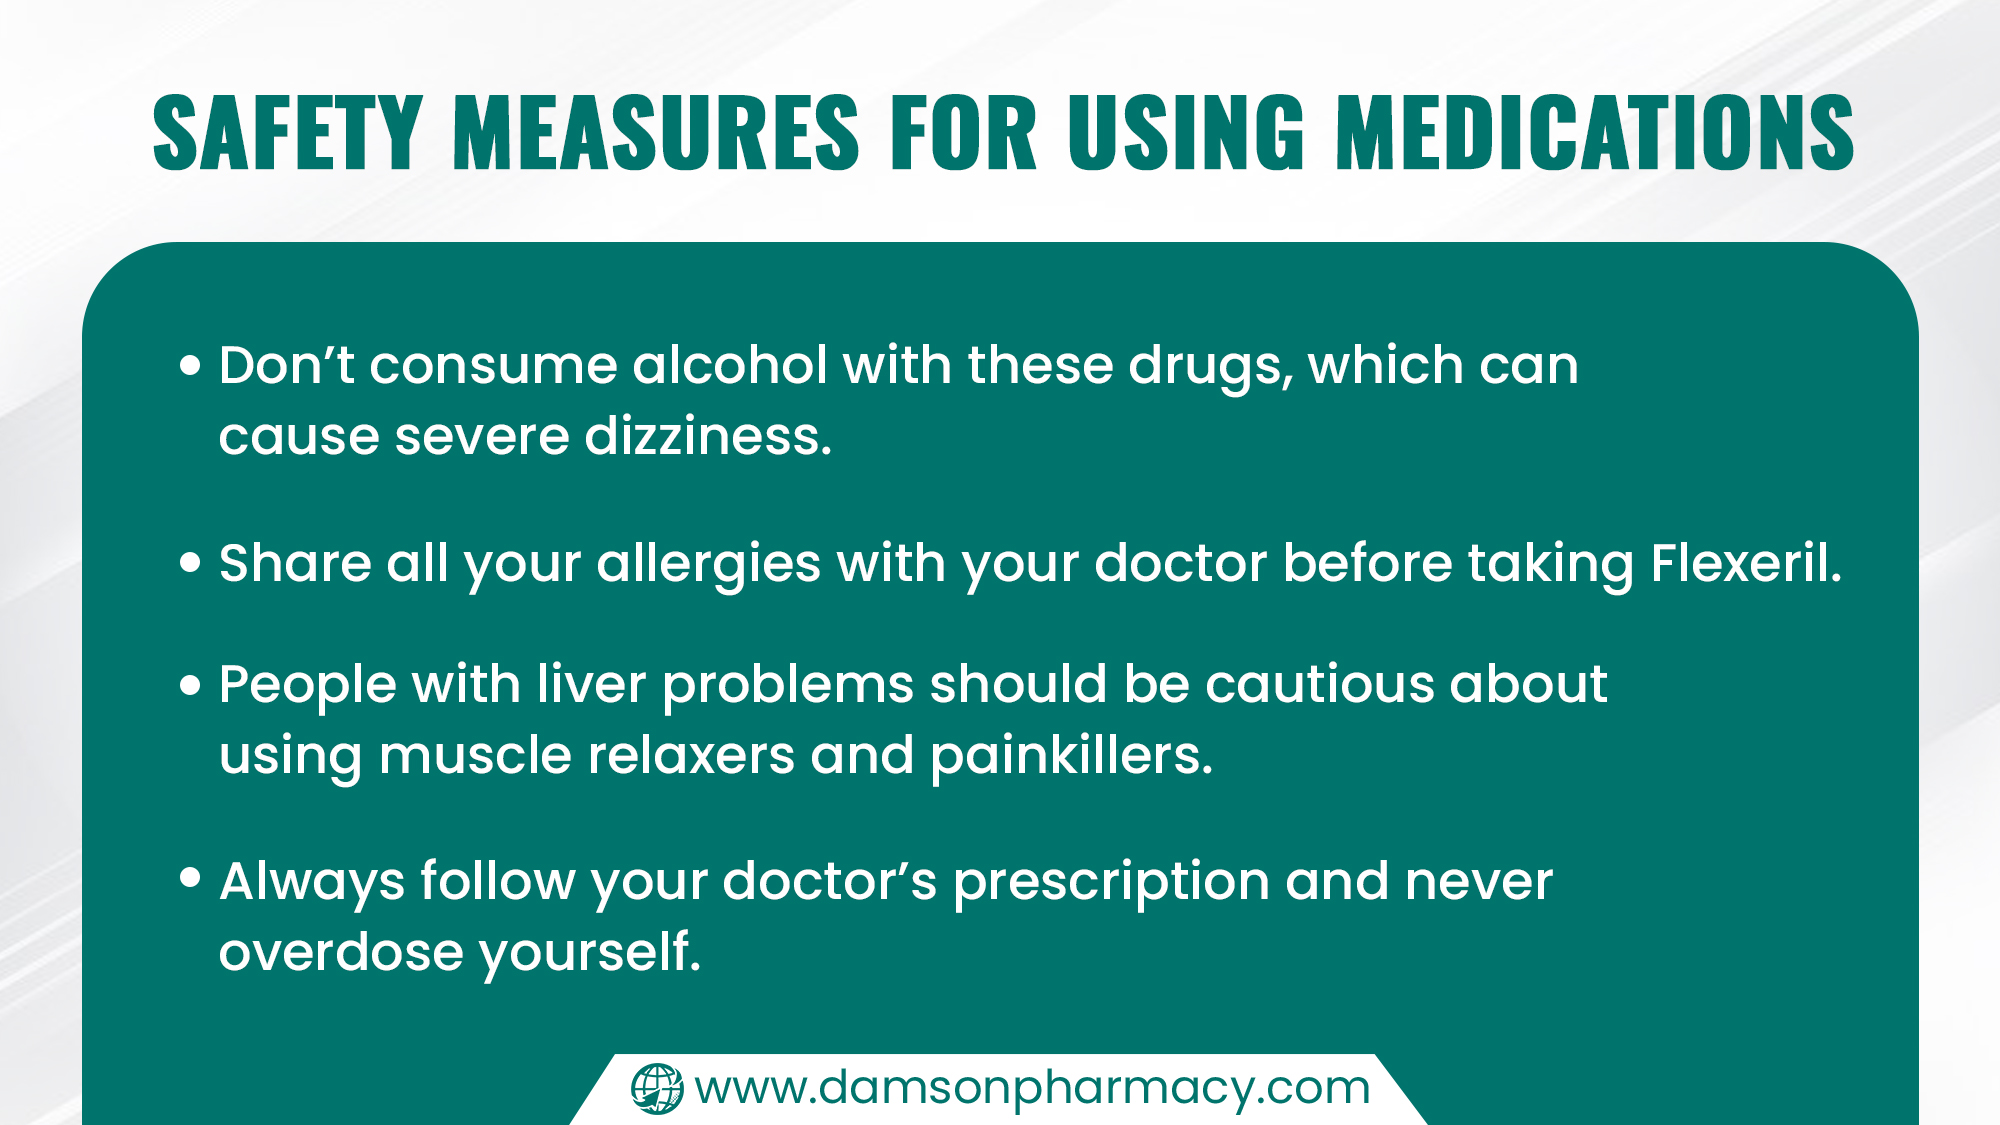 Safety Measures for Using Medications